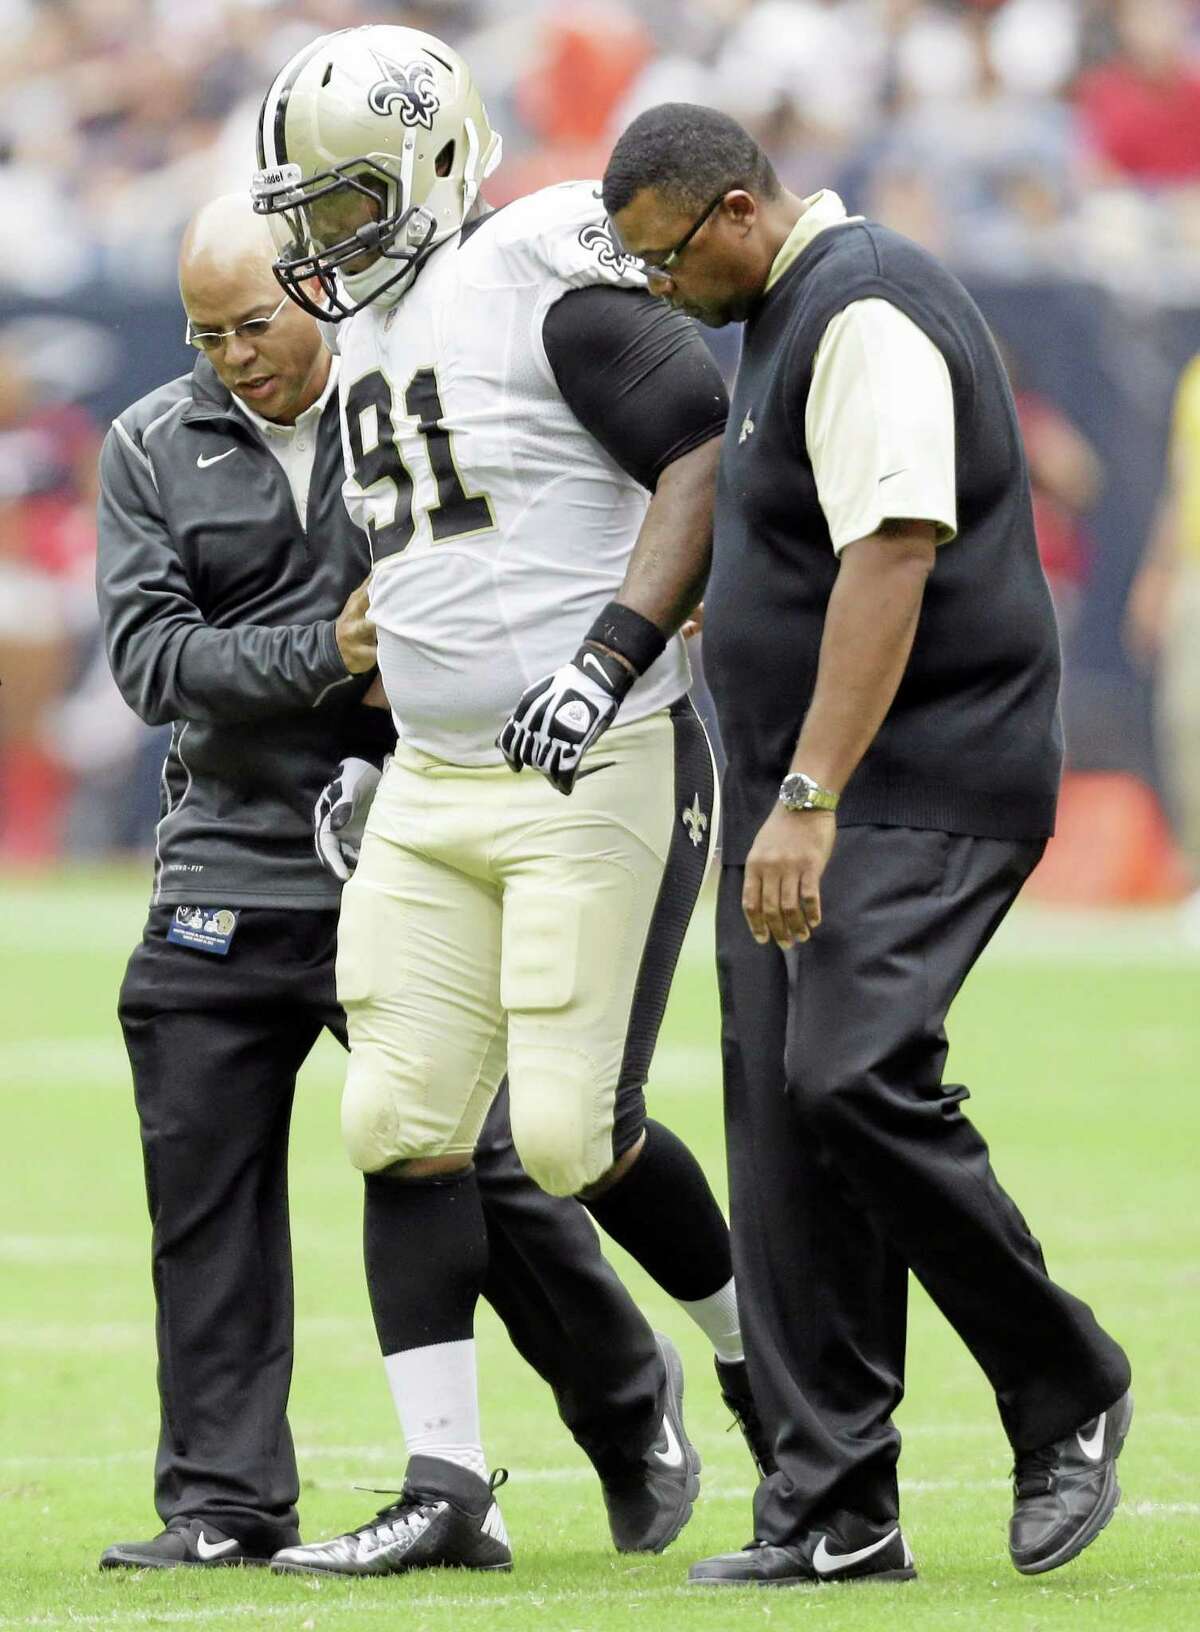 New Orleans Saints linebacker Will Smith (91) is helped off the field during the first half of a preseason NFL football game against the Houston Texans on Aug. 25, 2013, in Houston.